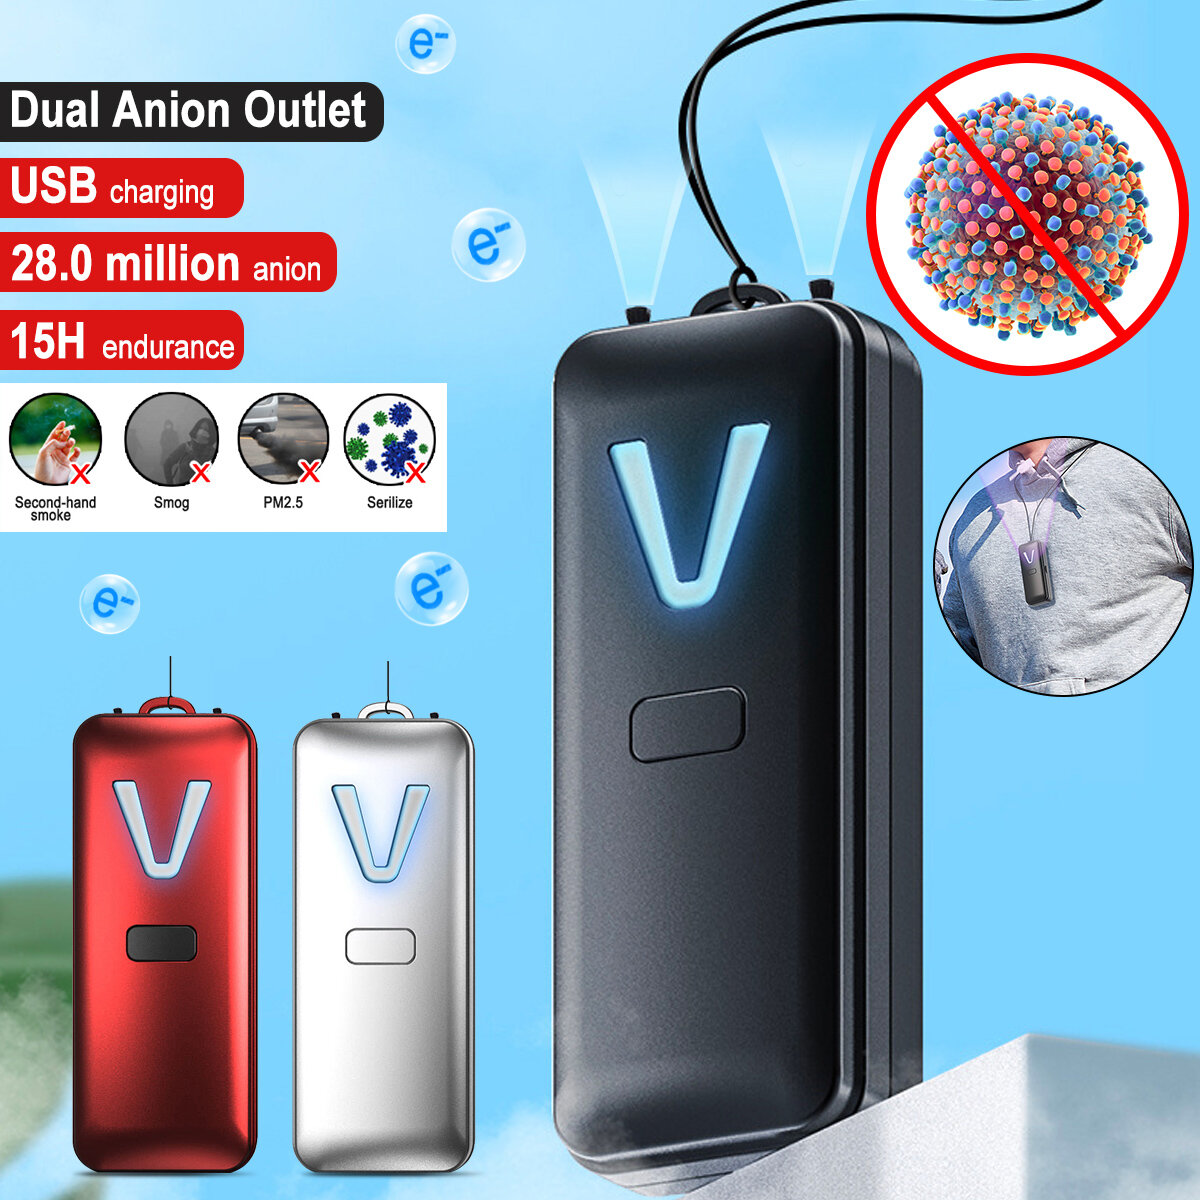 Mini USB Air Cleaner Negative Ion Generator Anion Portable Wearable Air Purifier Ionizer For PM2.5 Dust Pollen Mite Smok